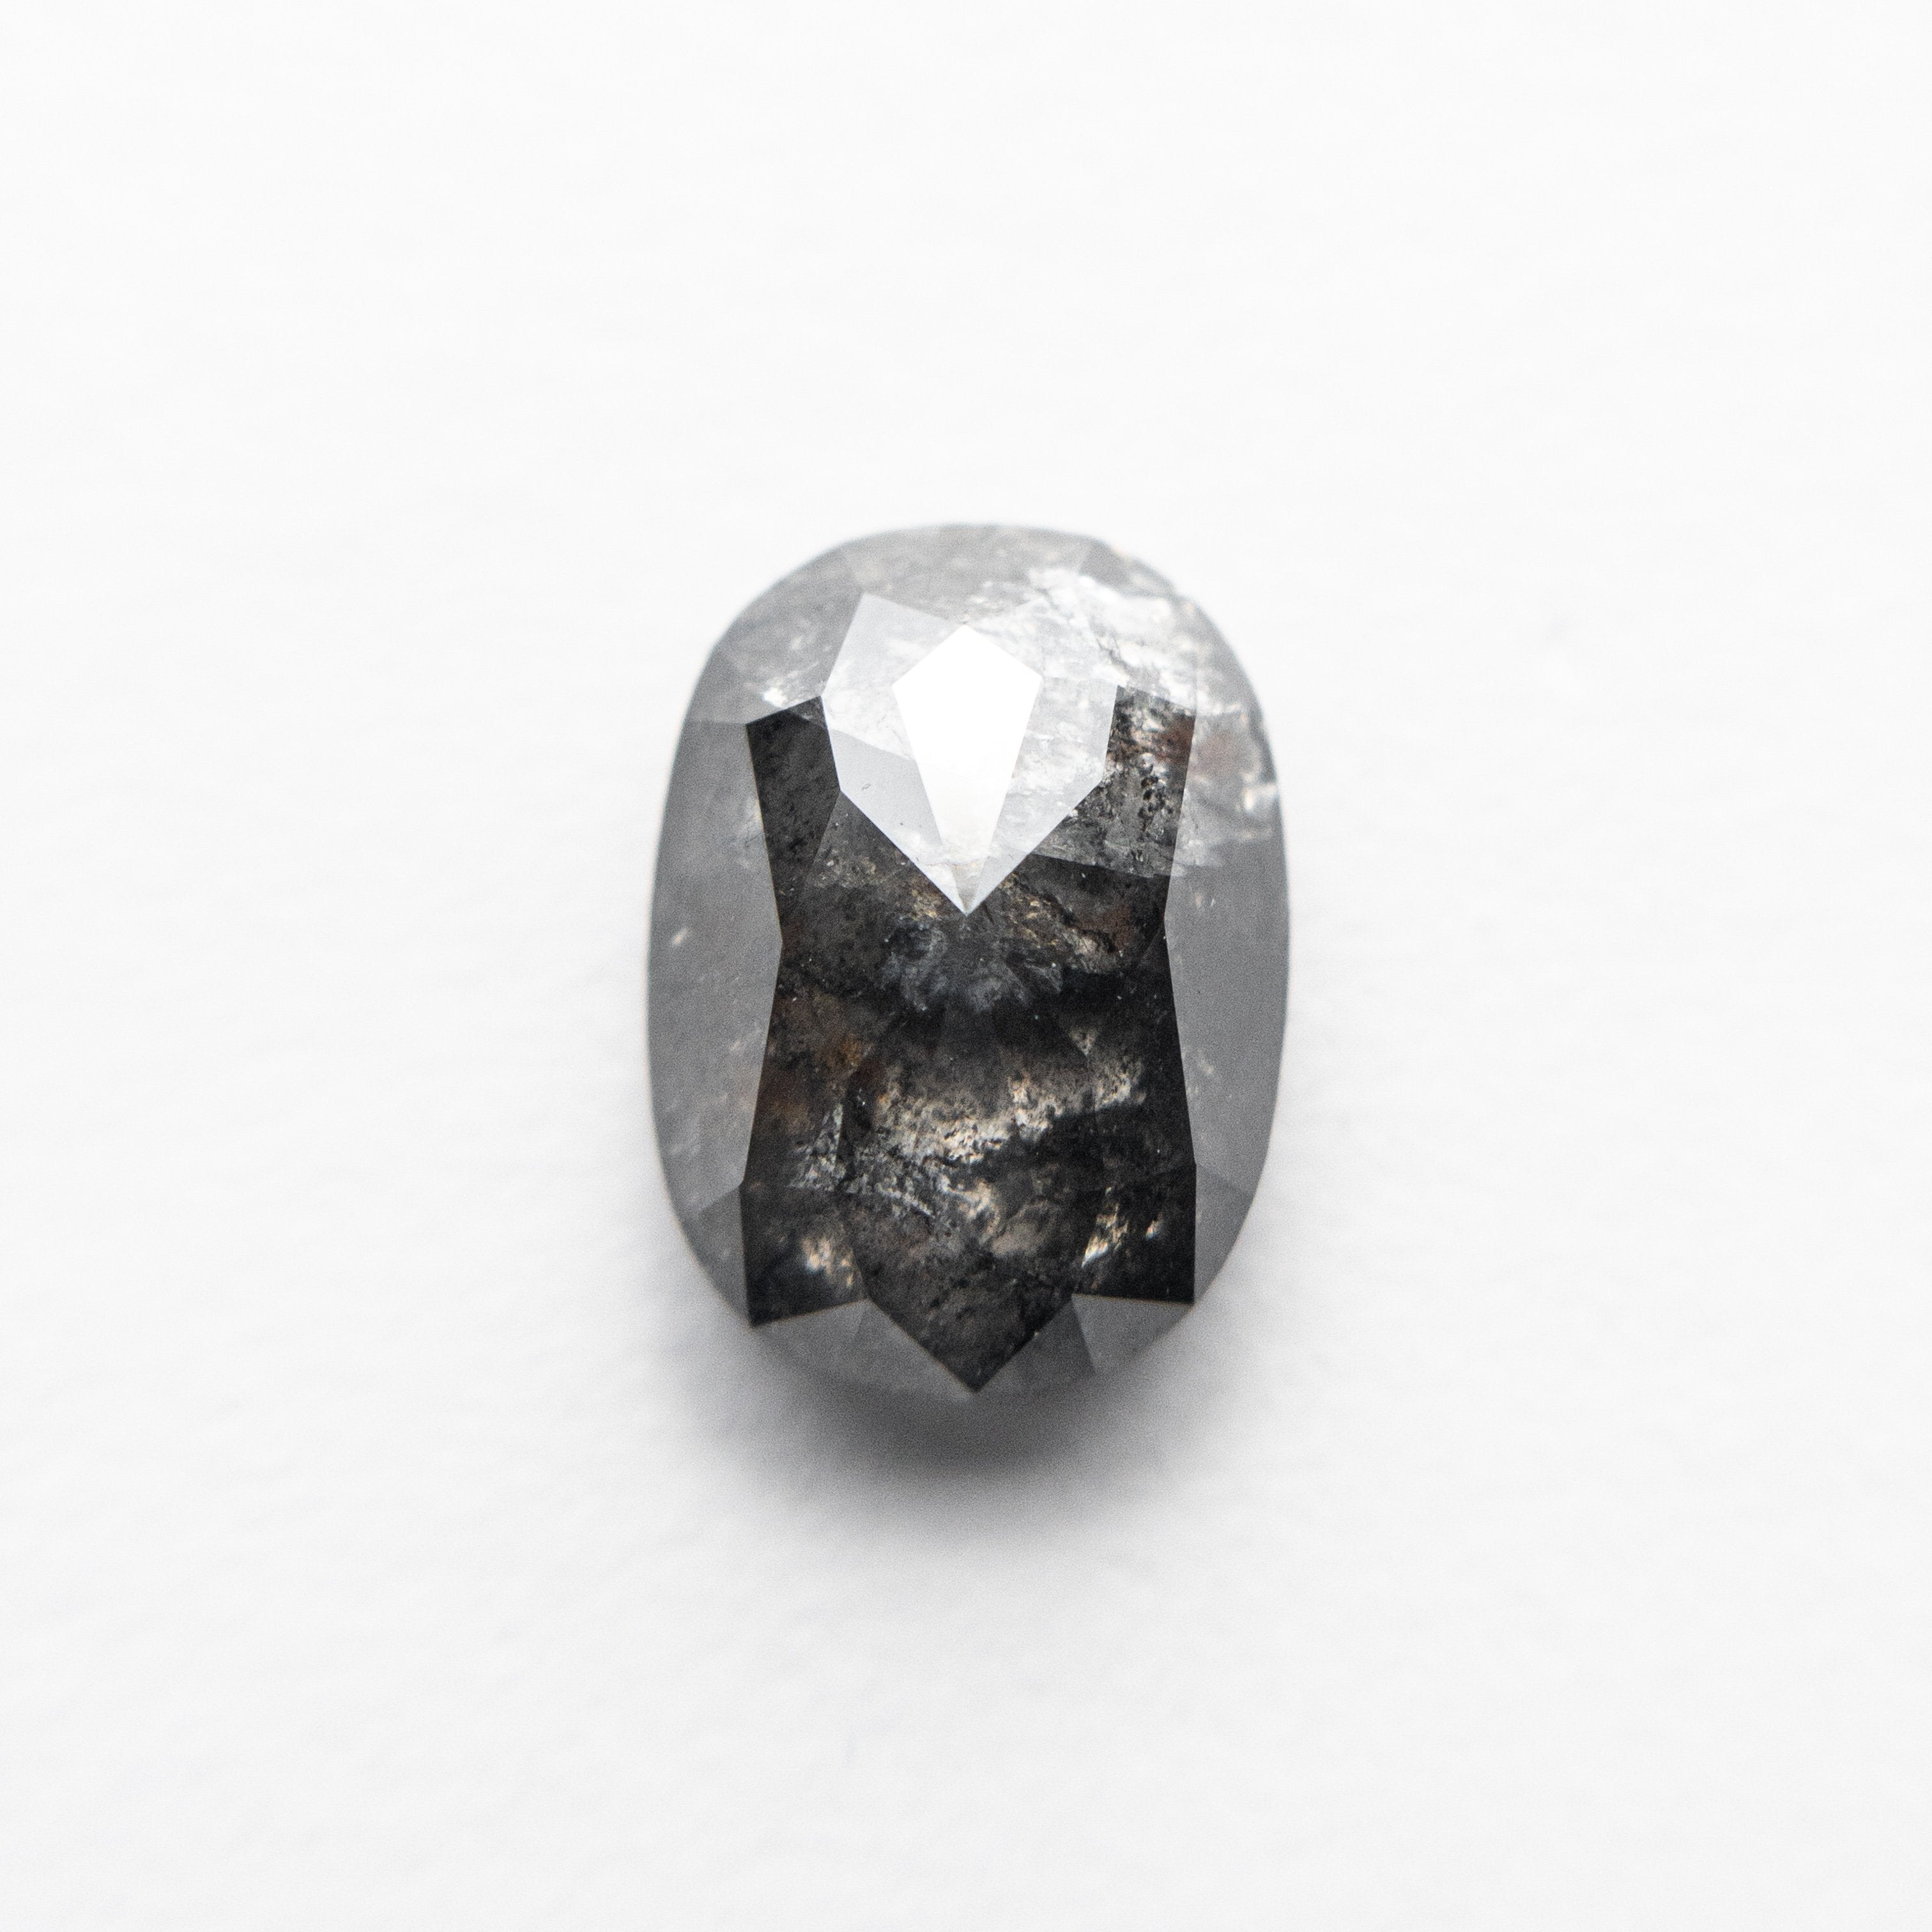 1.91ct 8.70x6.36x3.59mm Oval Double Cut 18758-03